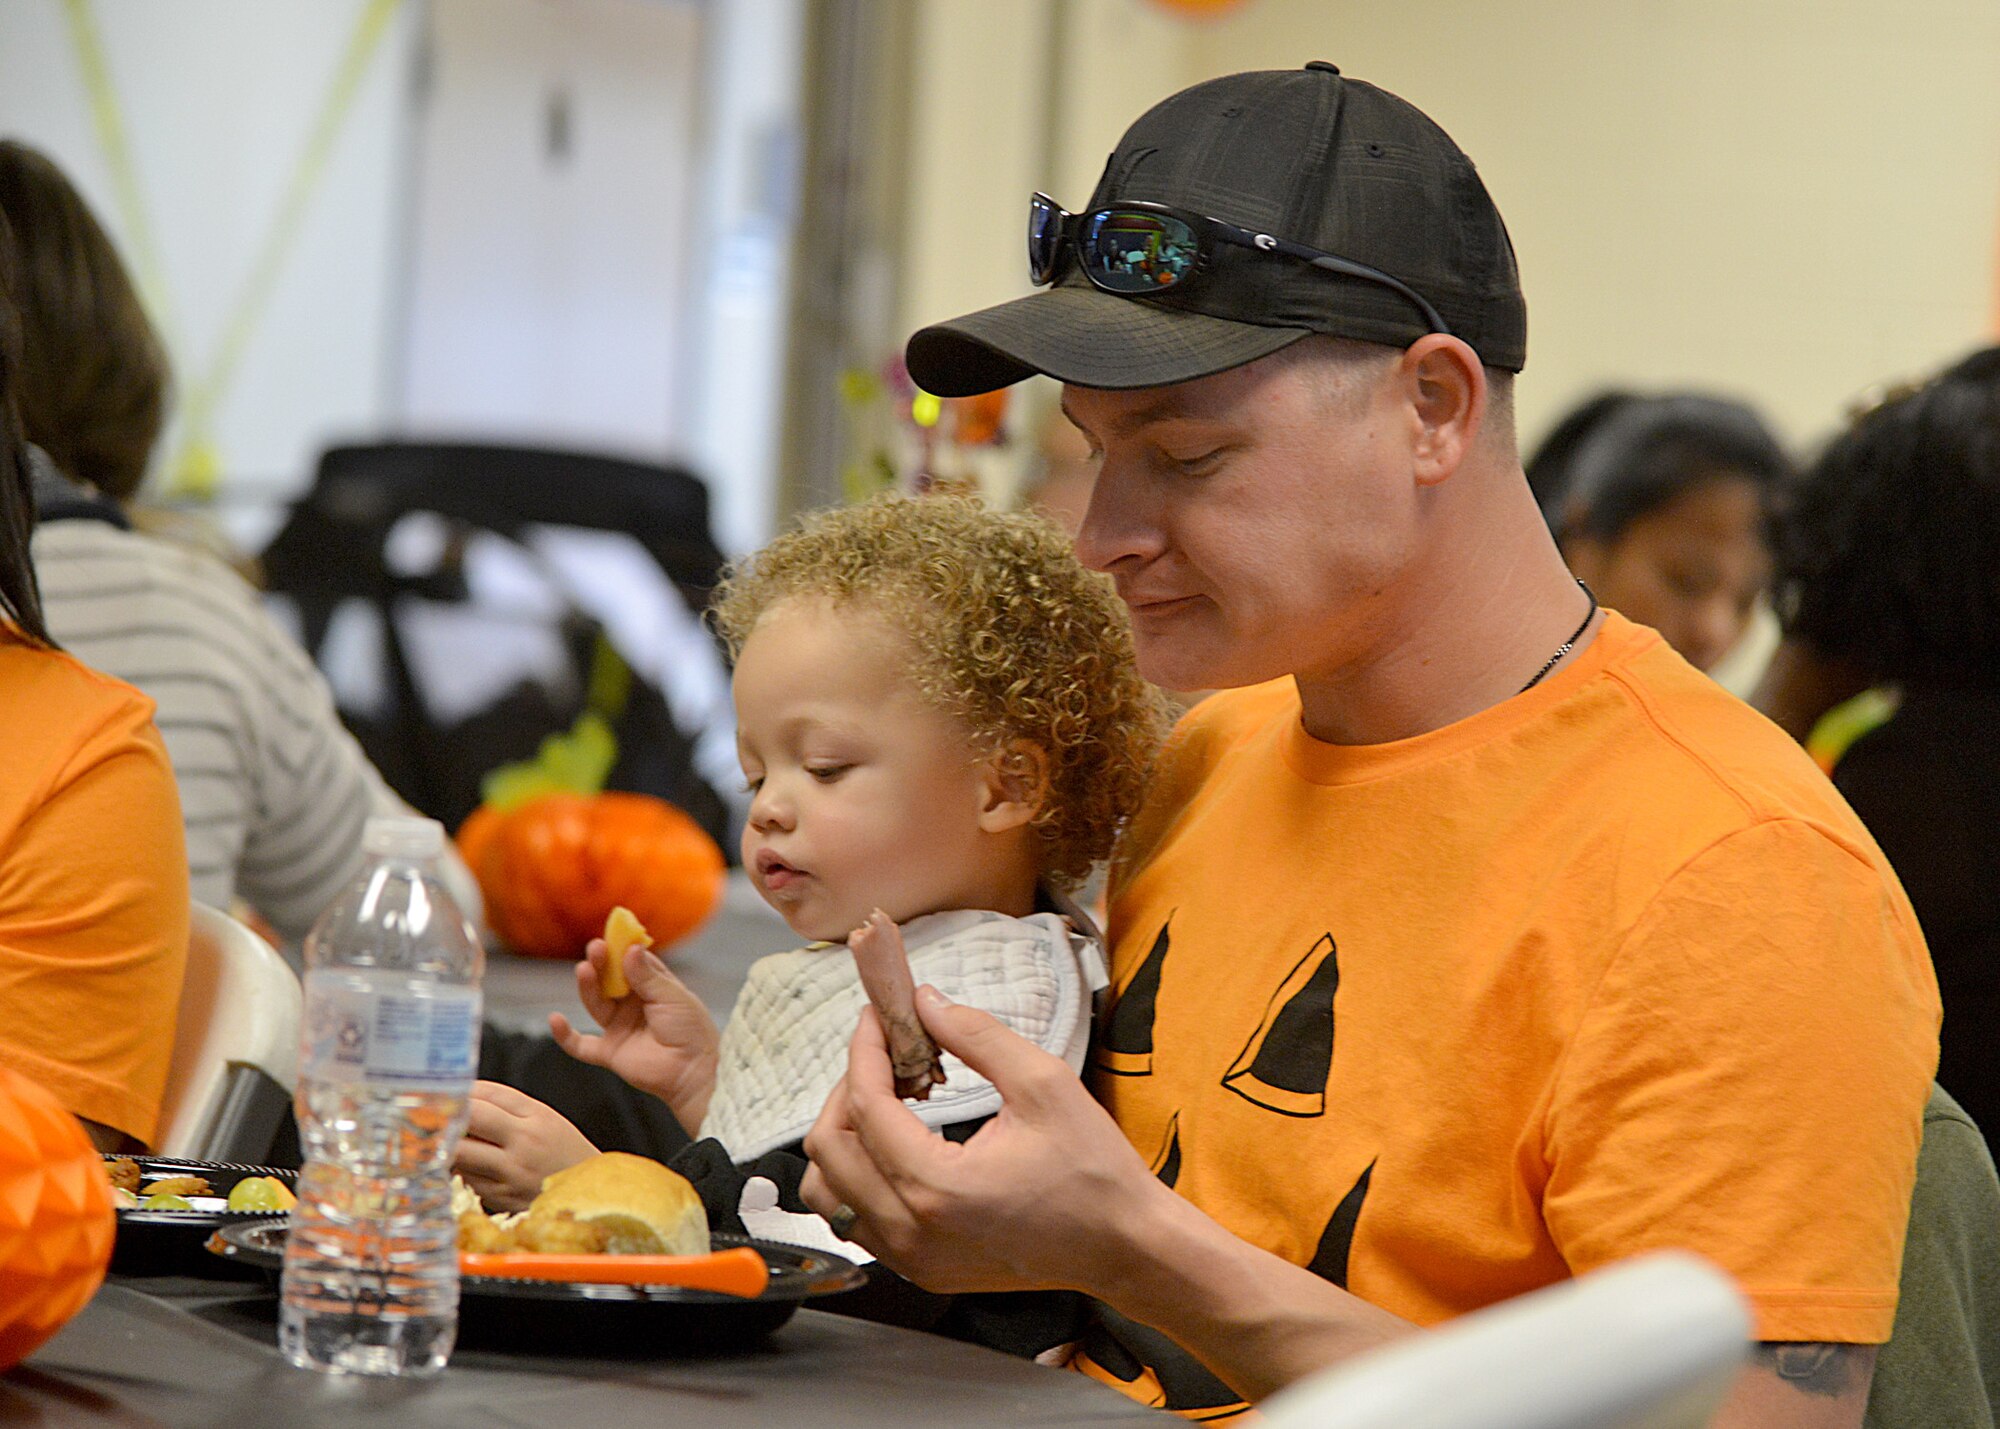 Staff Sgt. Kyle Johnson from 58th Aircraft Maintenance Squadron eats with his son Kaidyn, 2, at a special Halloween Kirtland Playgroup here Oct. 30, 2018. The weekly playgroup is sponsored by Kirtland Family Advocacy and meets every Tuesday from 10:30 a.m. to noon in the Chapel Annex. The group provides unstructured play time for infants, toddlers and their parents. (U.S. Air Force photo by Todd Berenger)